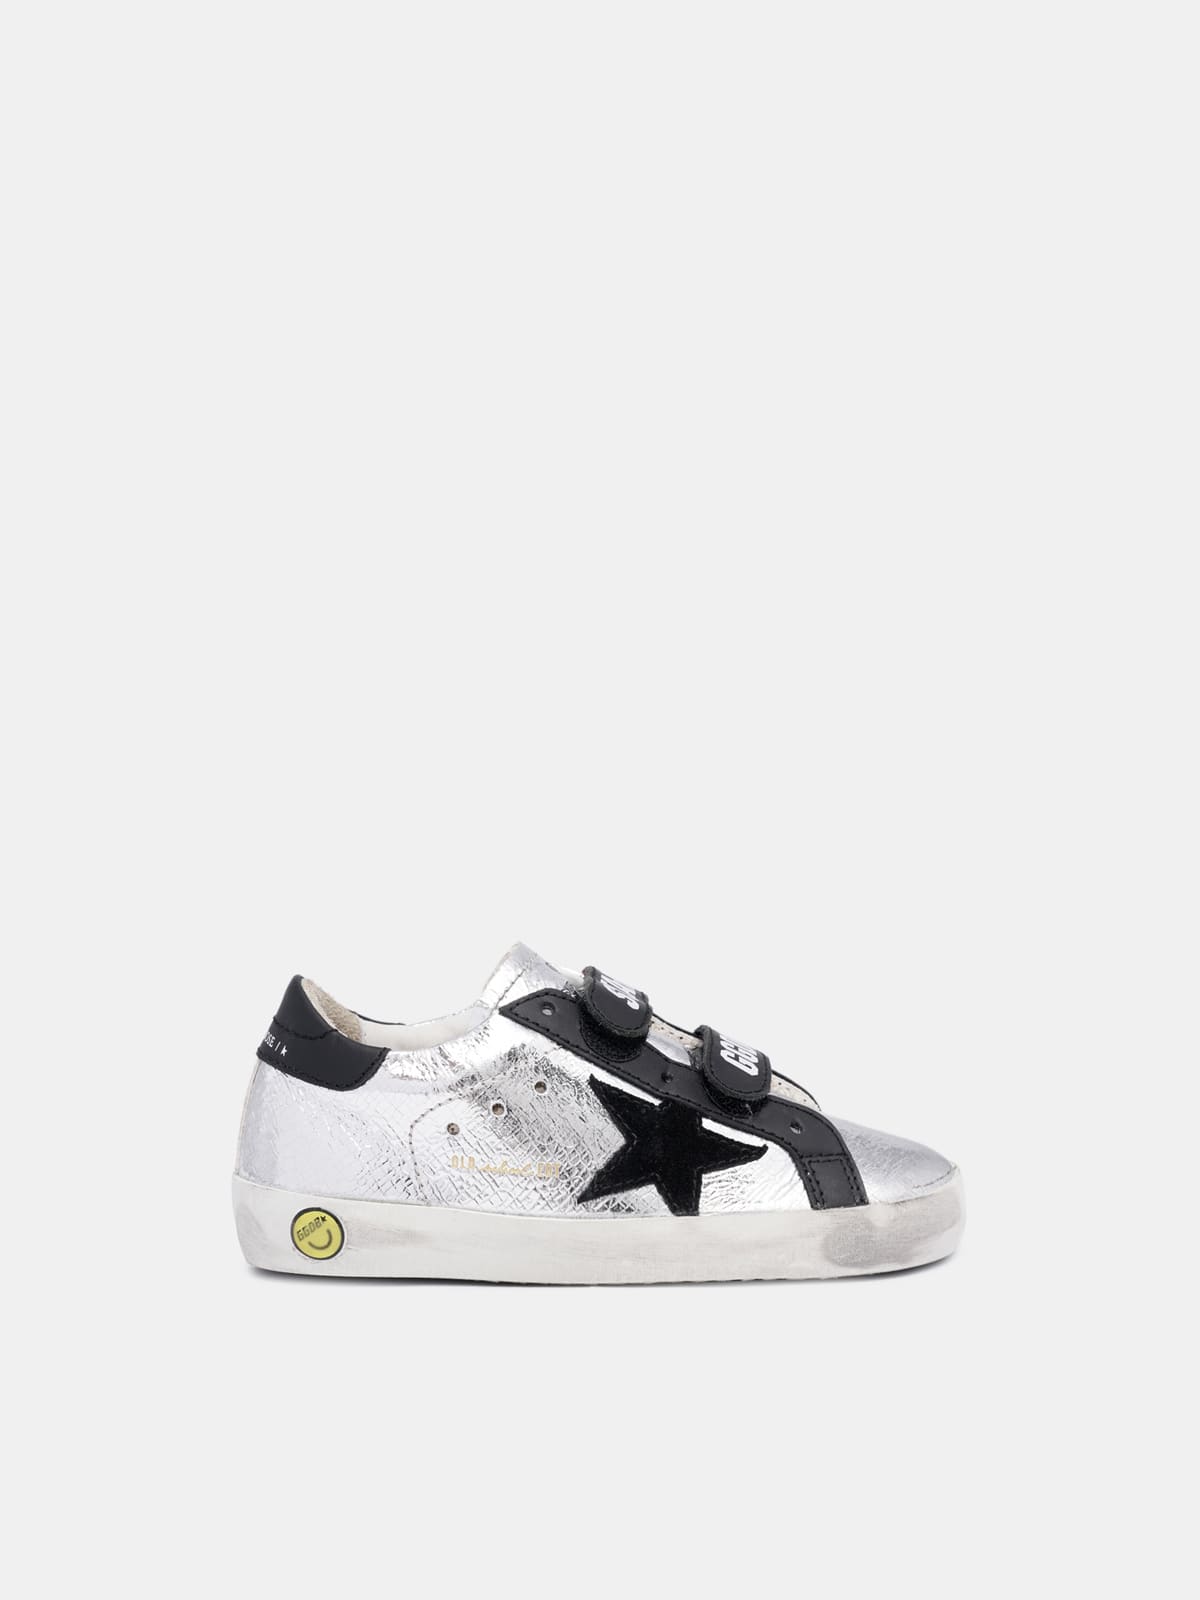 Old School sneakers in crackle-effect silver leather and black suede star |  Golden Goose